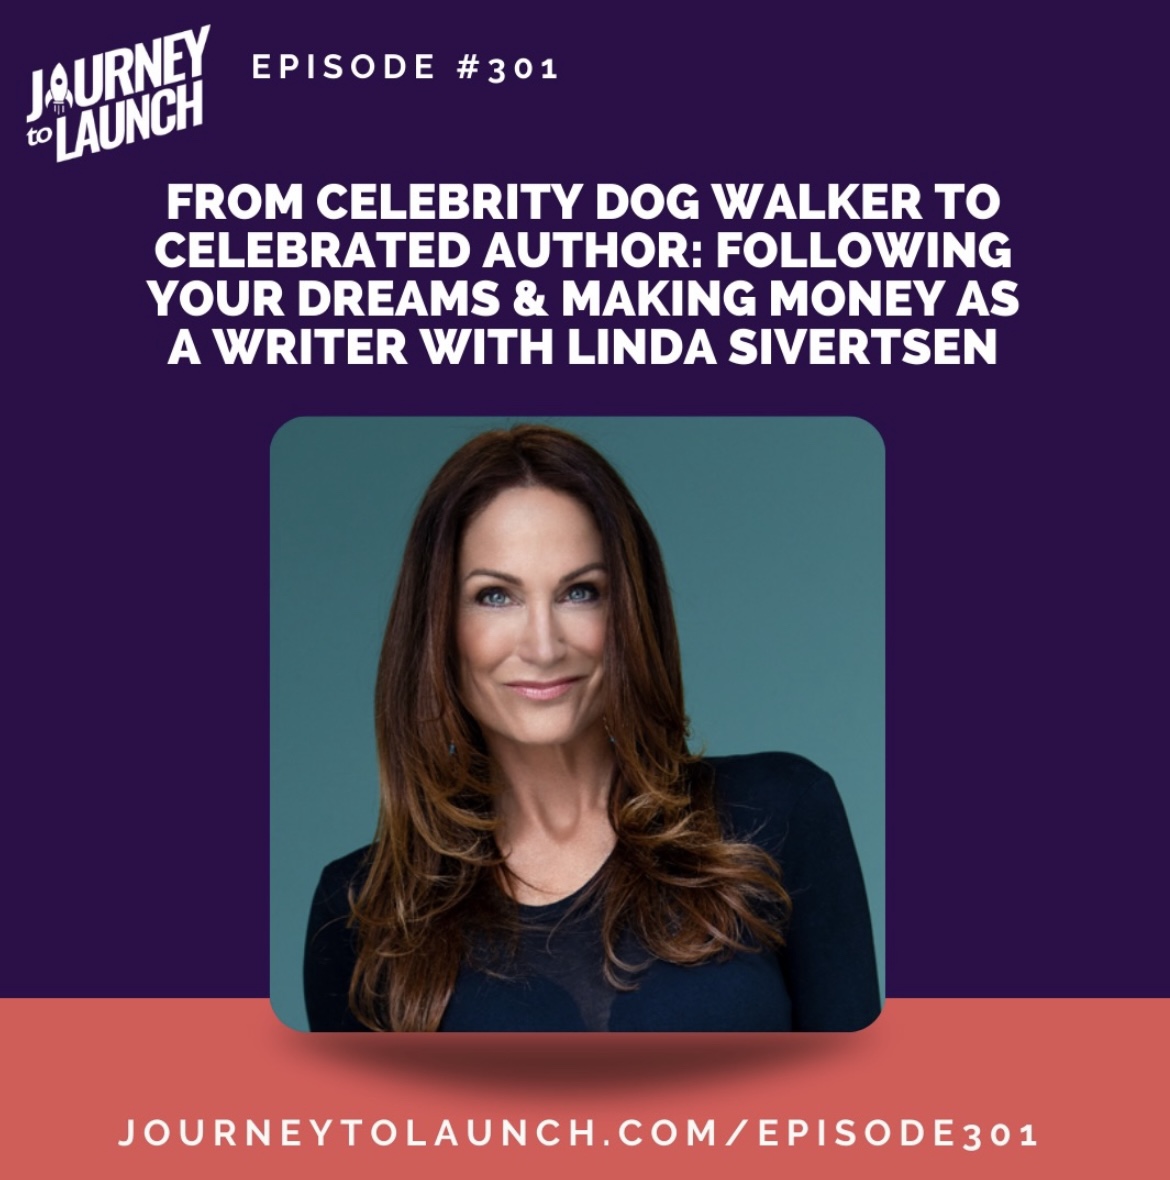 From Celebrity Dog Walker To Celebrated Author: Following Your Dreams & Making Money As A Writer With Linda Sivertsen